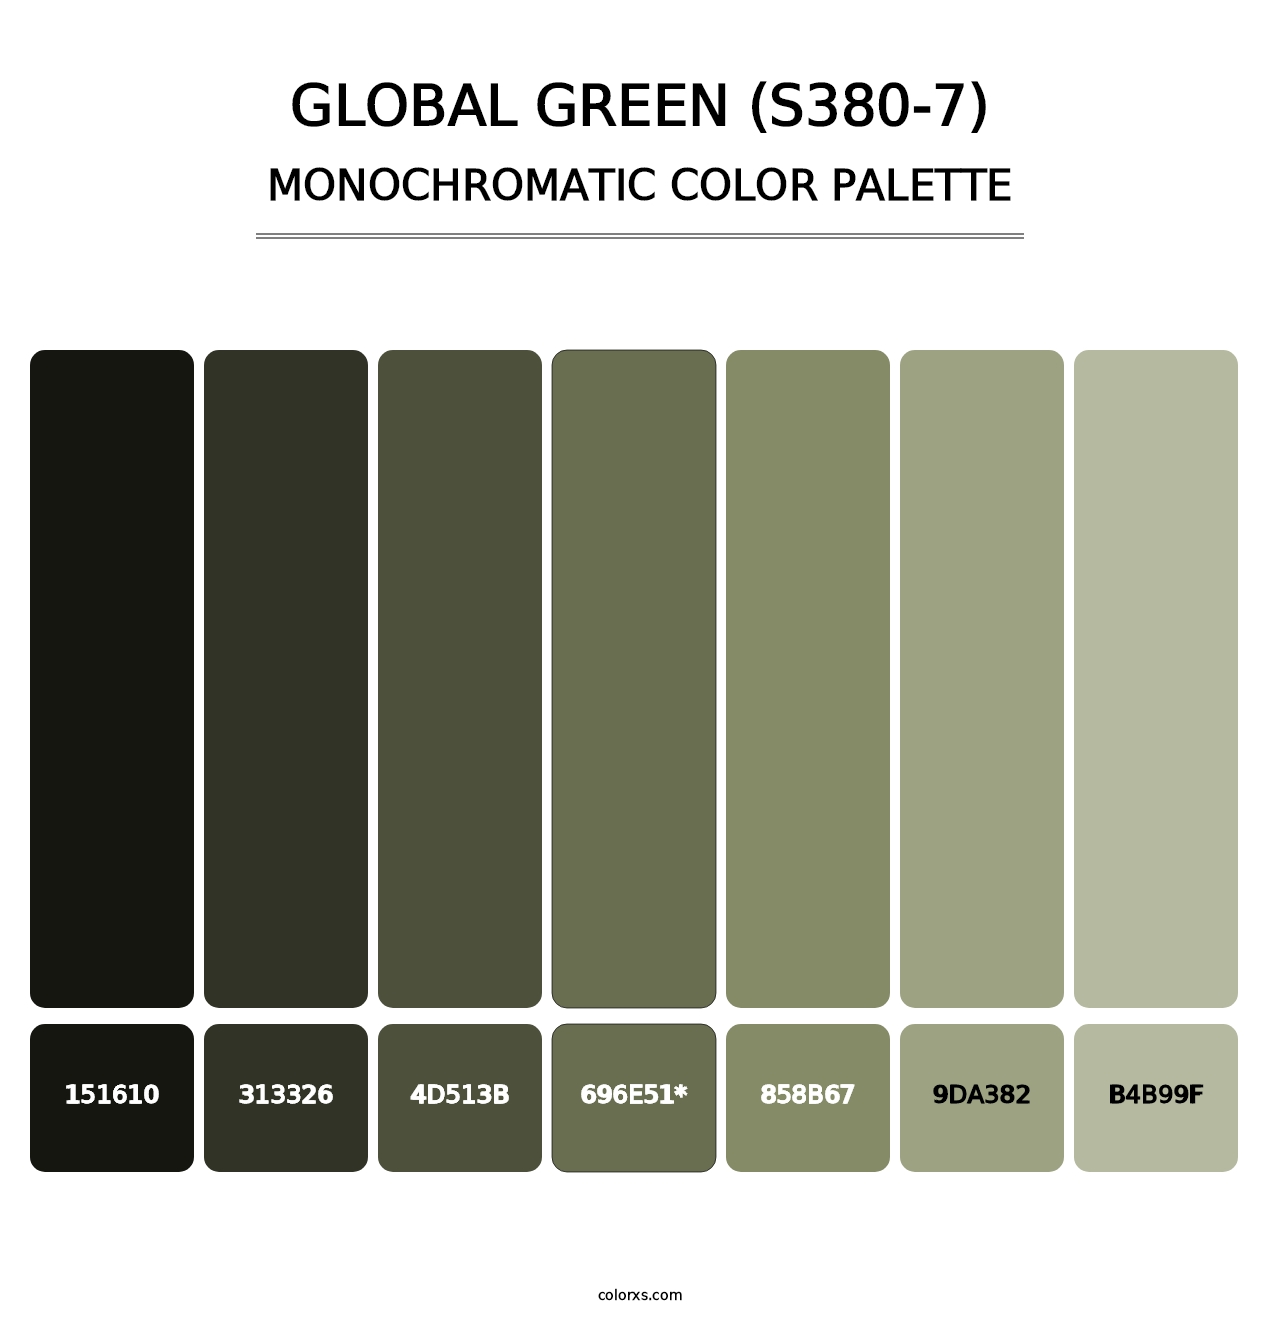 Global Green (S380-7) - Monochromatic Color Palette